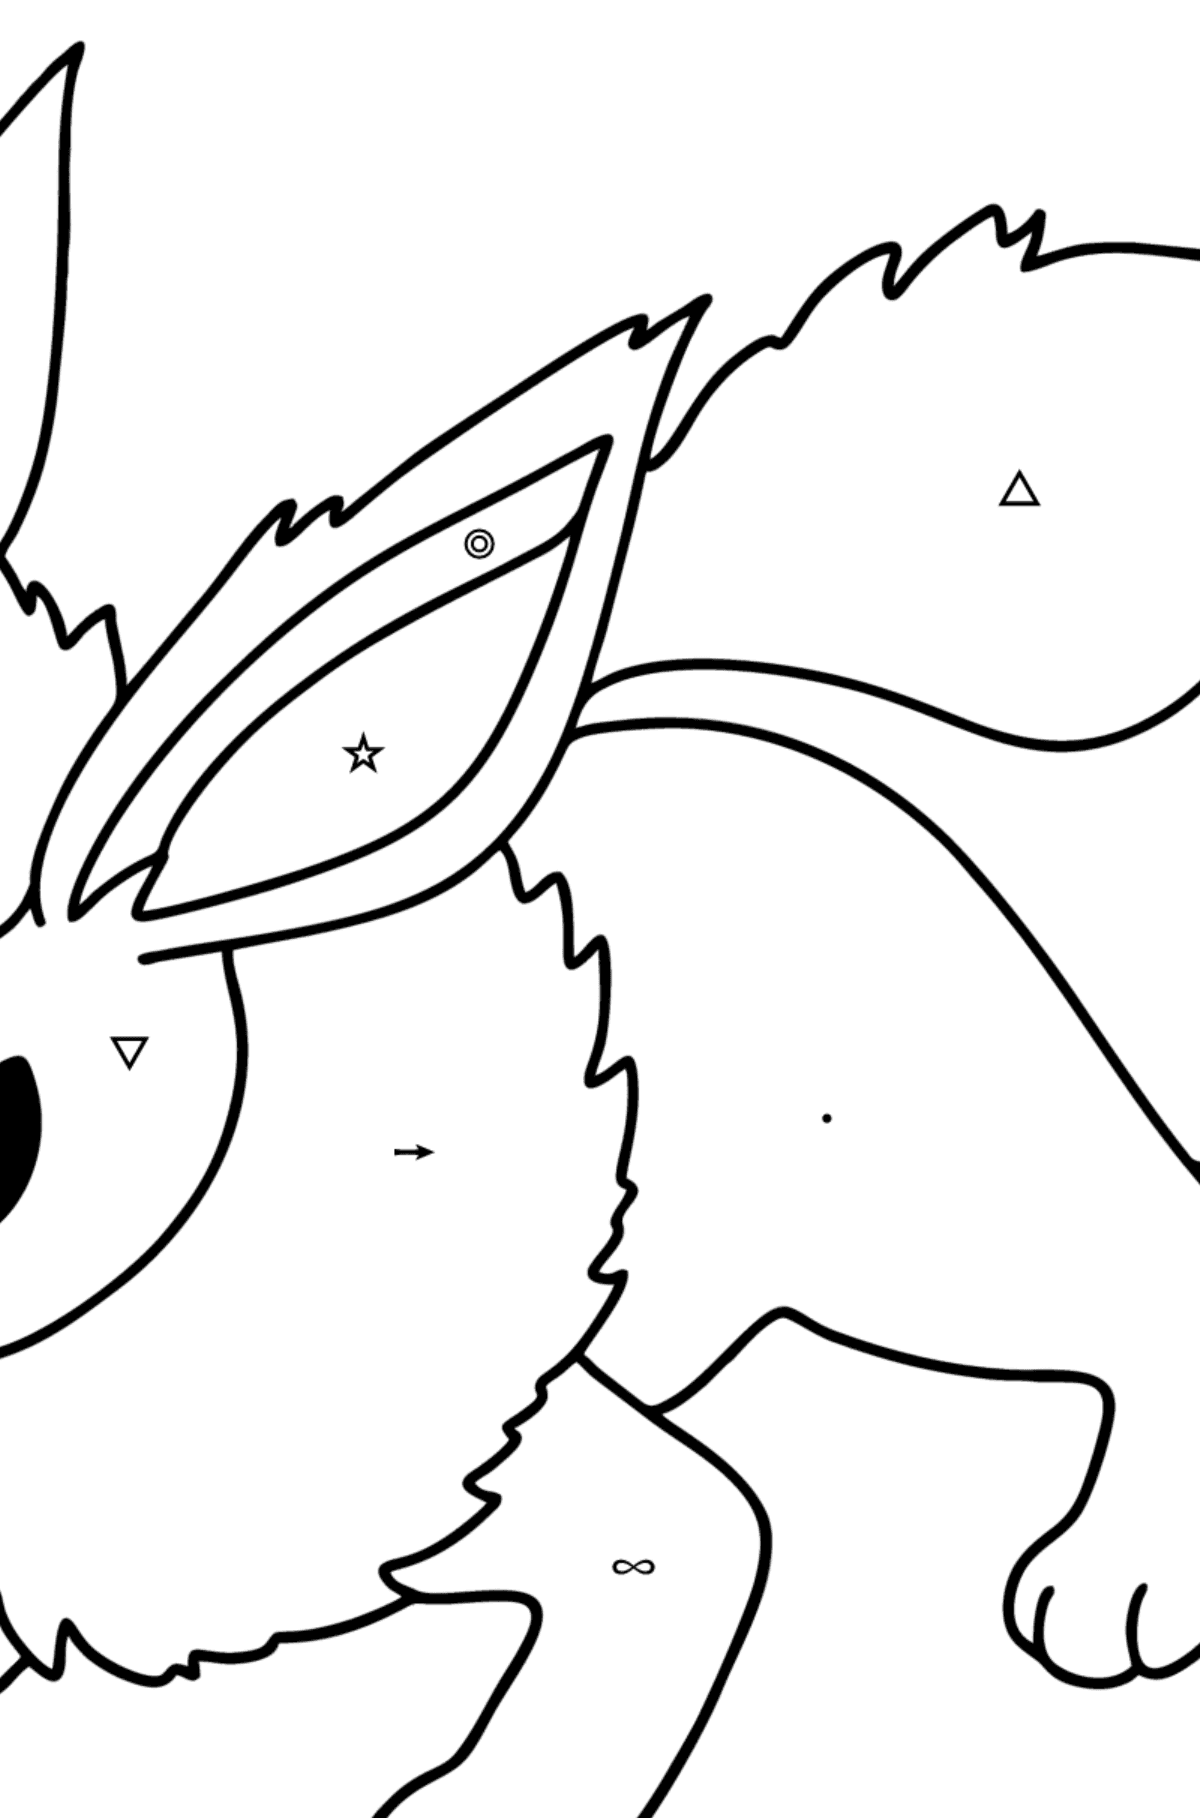 Pokemon Go Flareon coloring page - Coloring by Symbols and Geometric Shapes for Kids